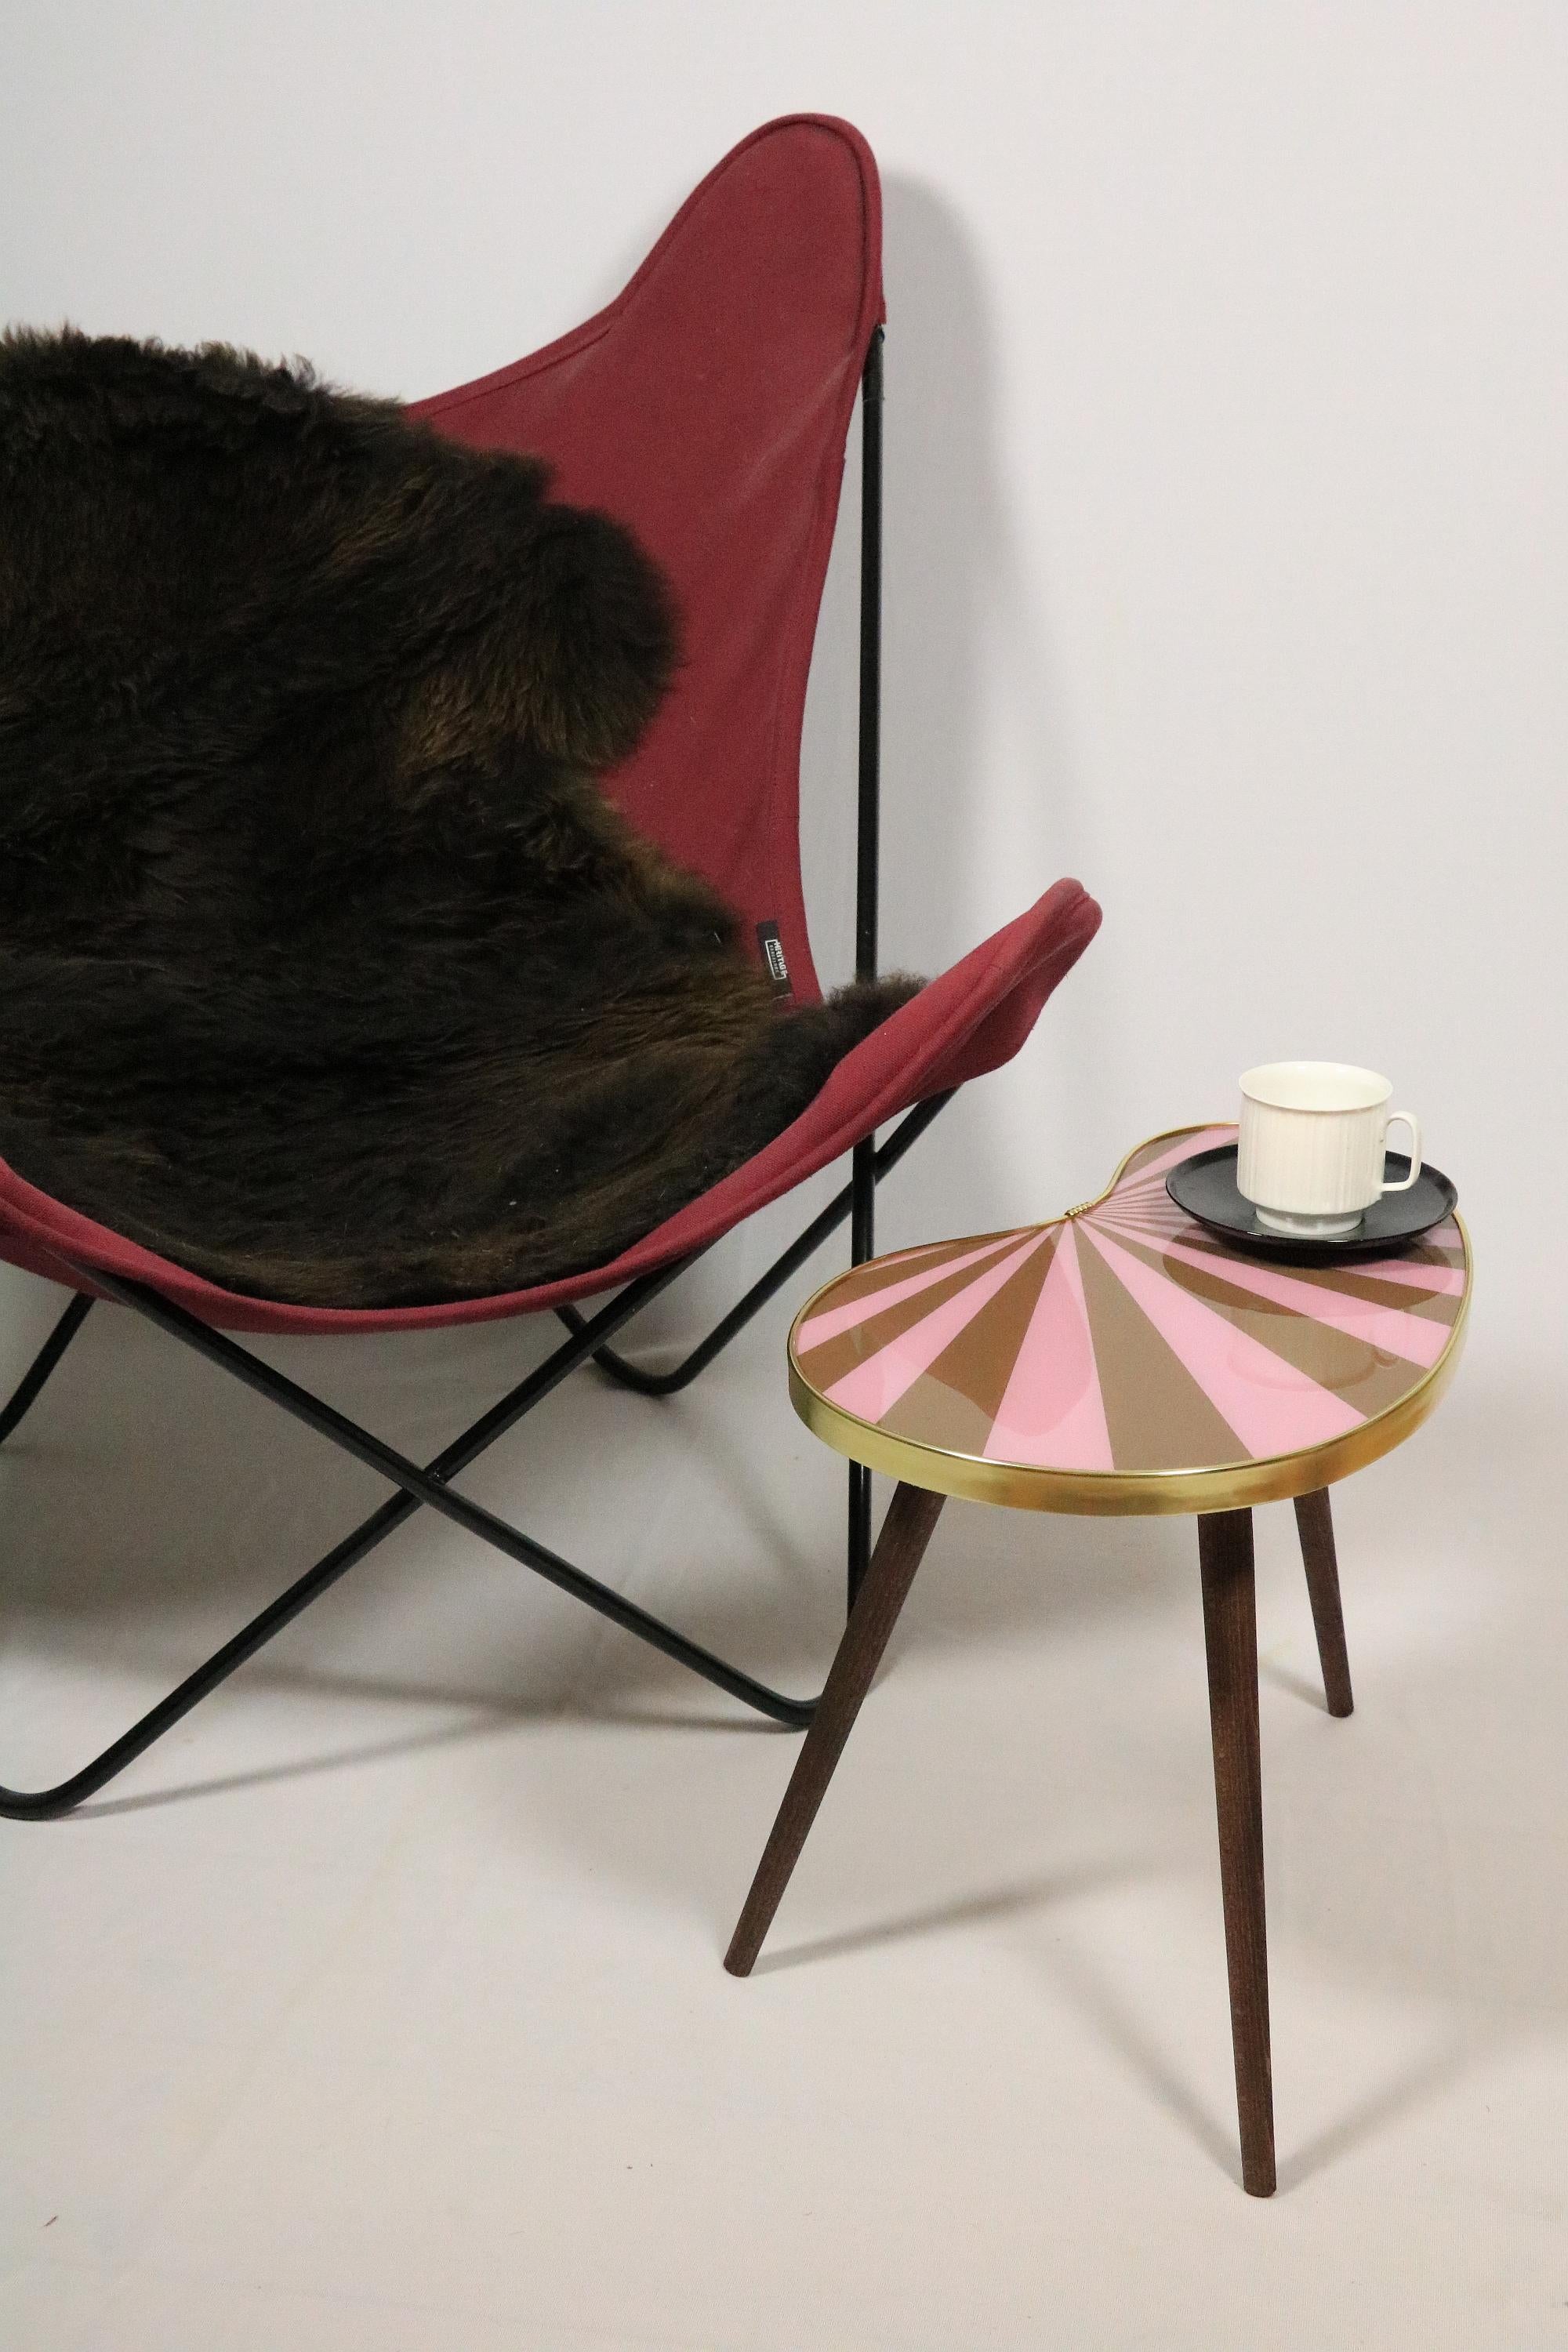 Small Side Table, Kidney Shaped, Pink-Taupe Stripes, 3 Elegant Legs, 50s Style For Sale 2